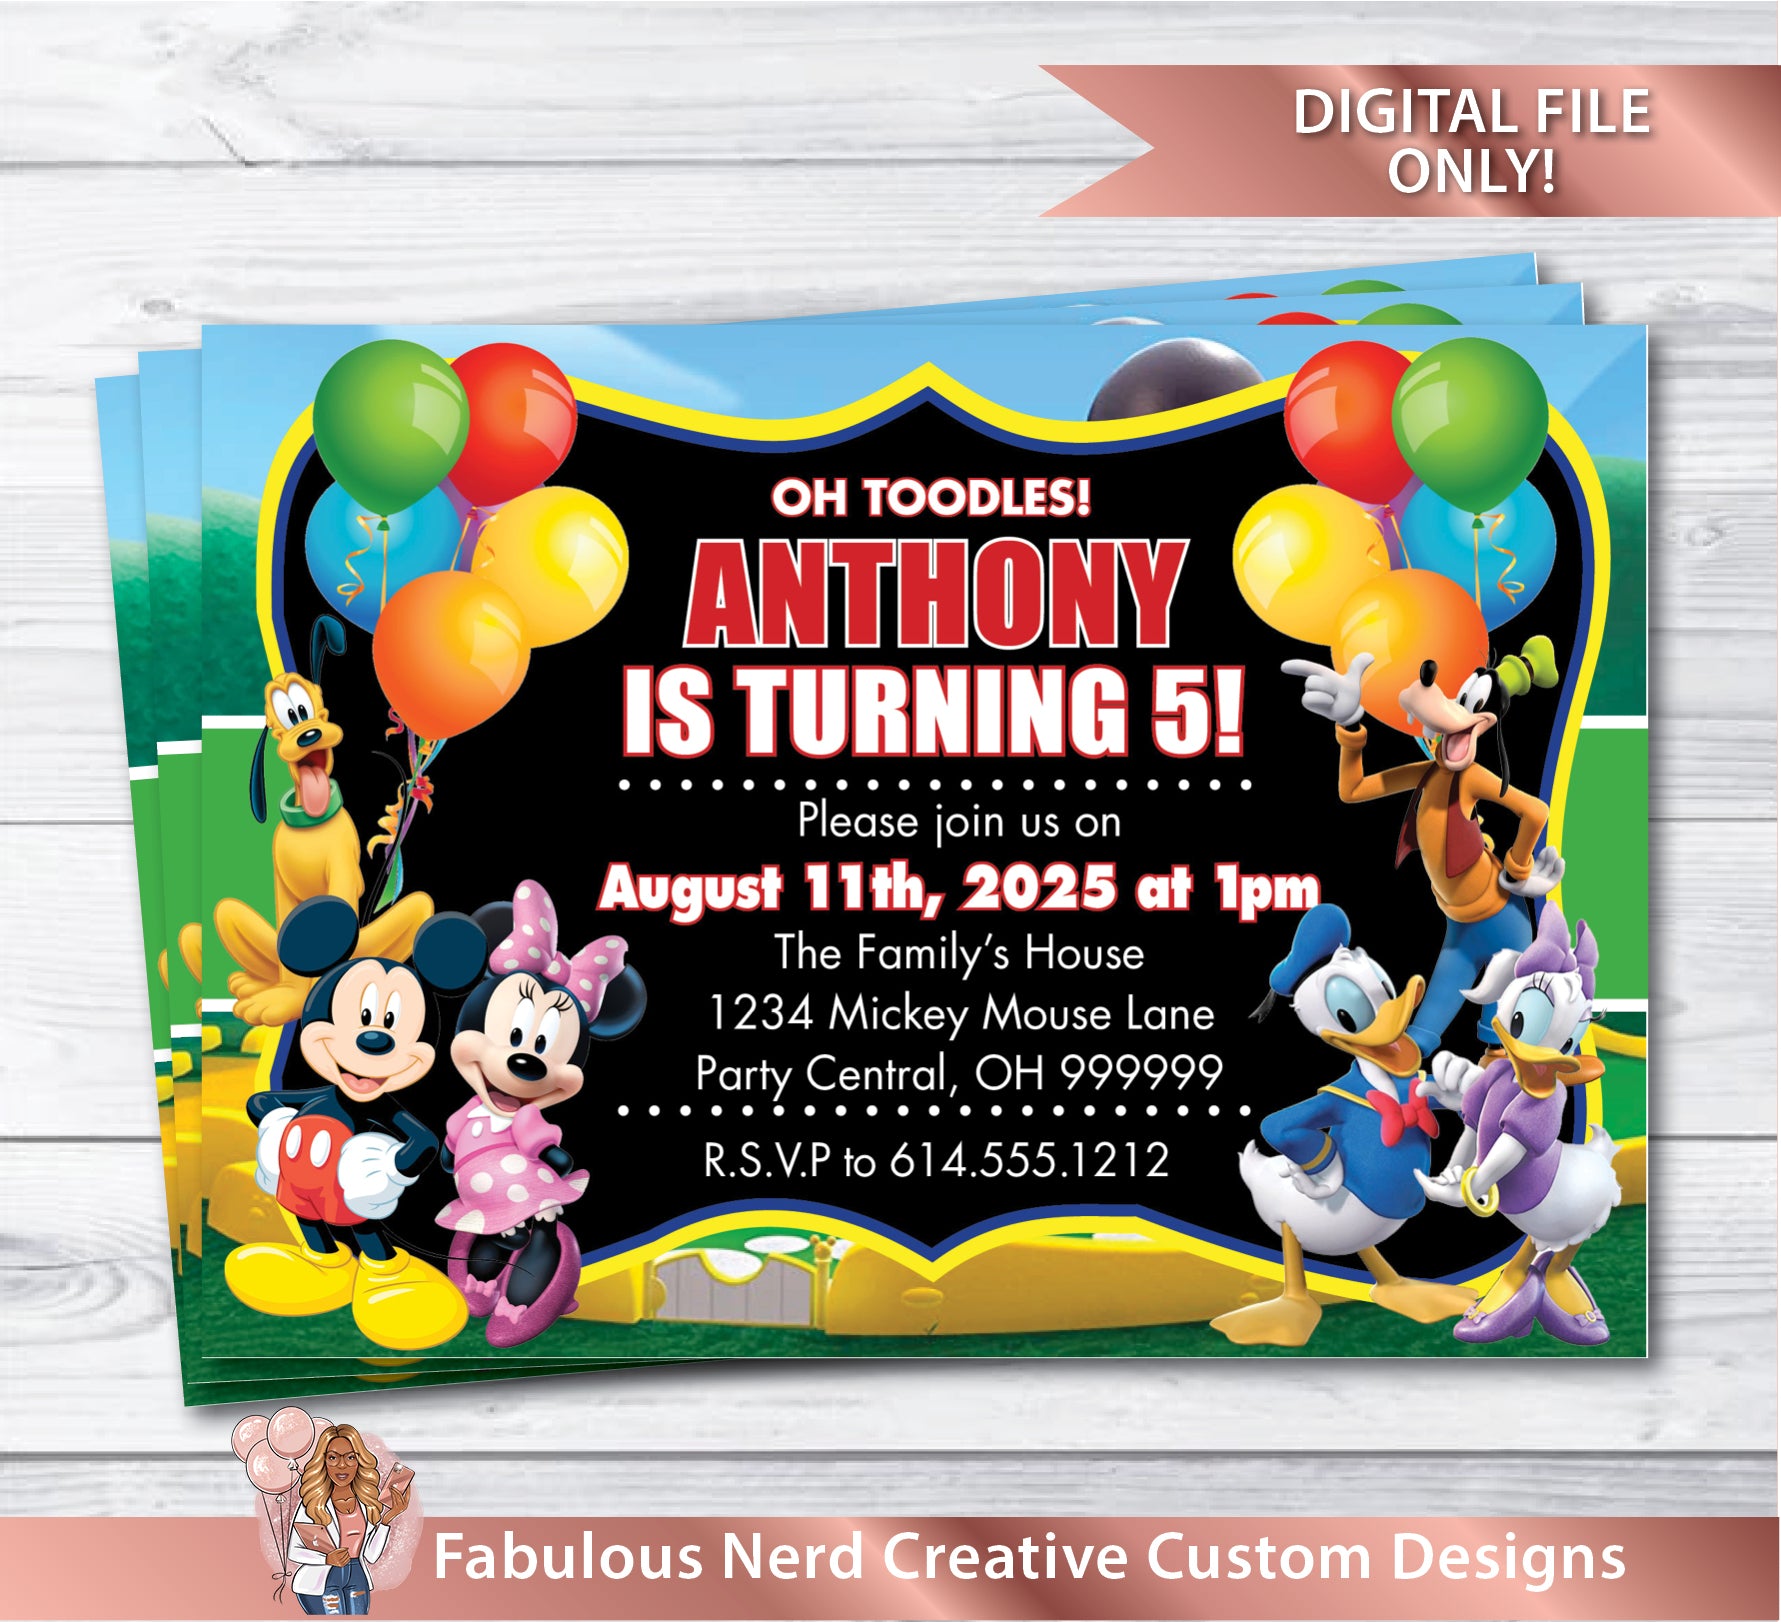 100 FREE DISNEY FONTS  Mickey mouse clubhouse birthday party, Mickey mouse  font, Mickey mouse clubhouse birthday